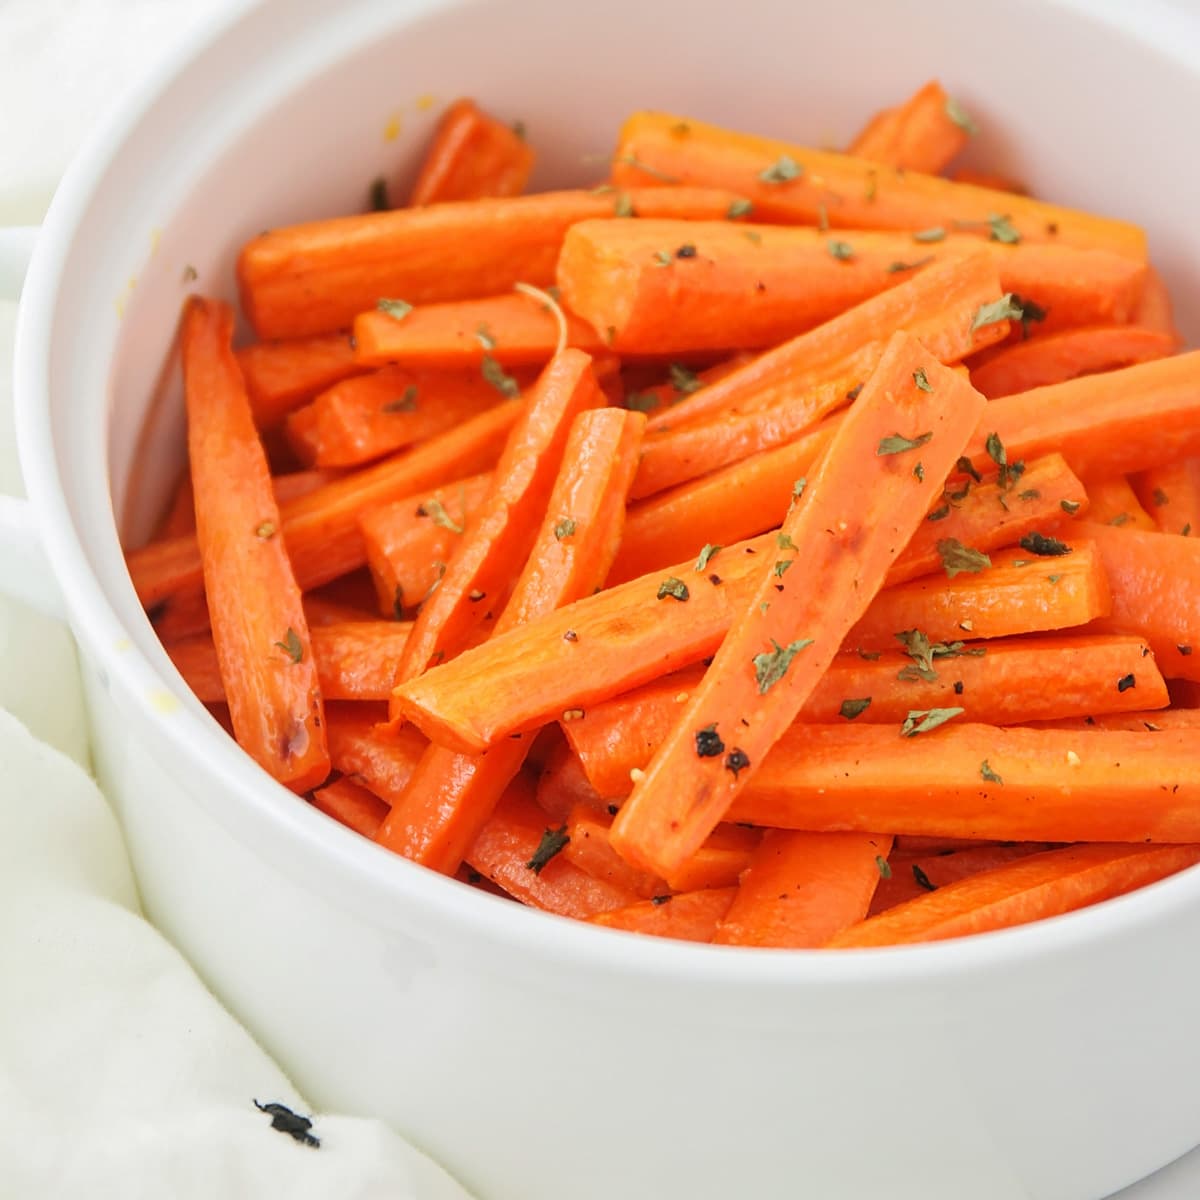 A white bowl filled with roasted carrots sprinkled with dried herbs.